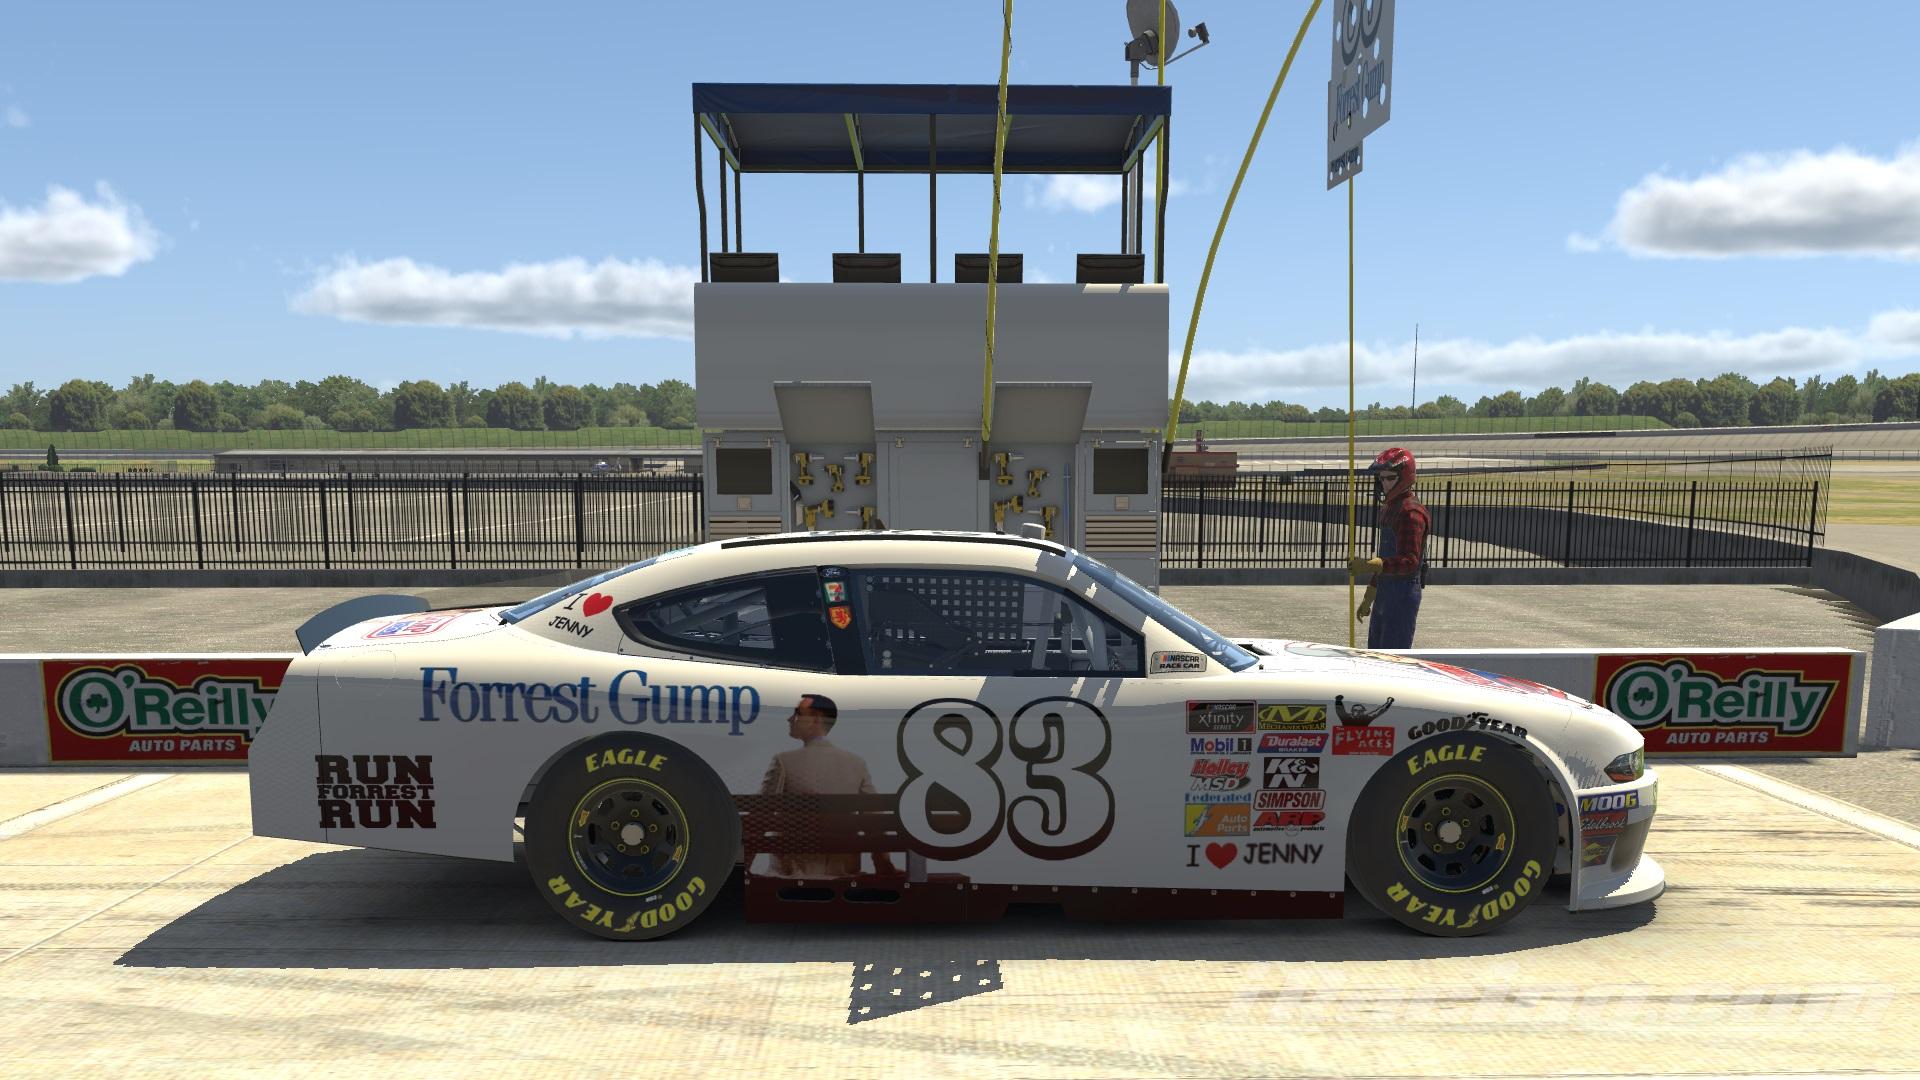 Preview of Forrest Gump - Bubba Gump Racing XFINITY Mustang by Scott Spidle